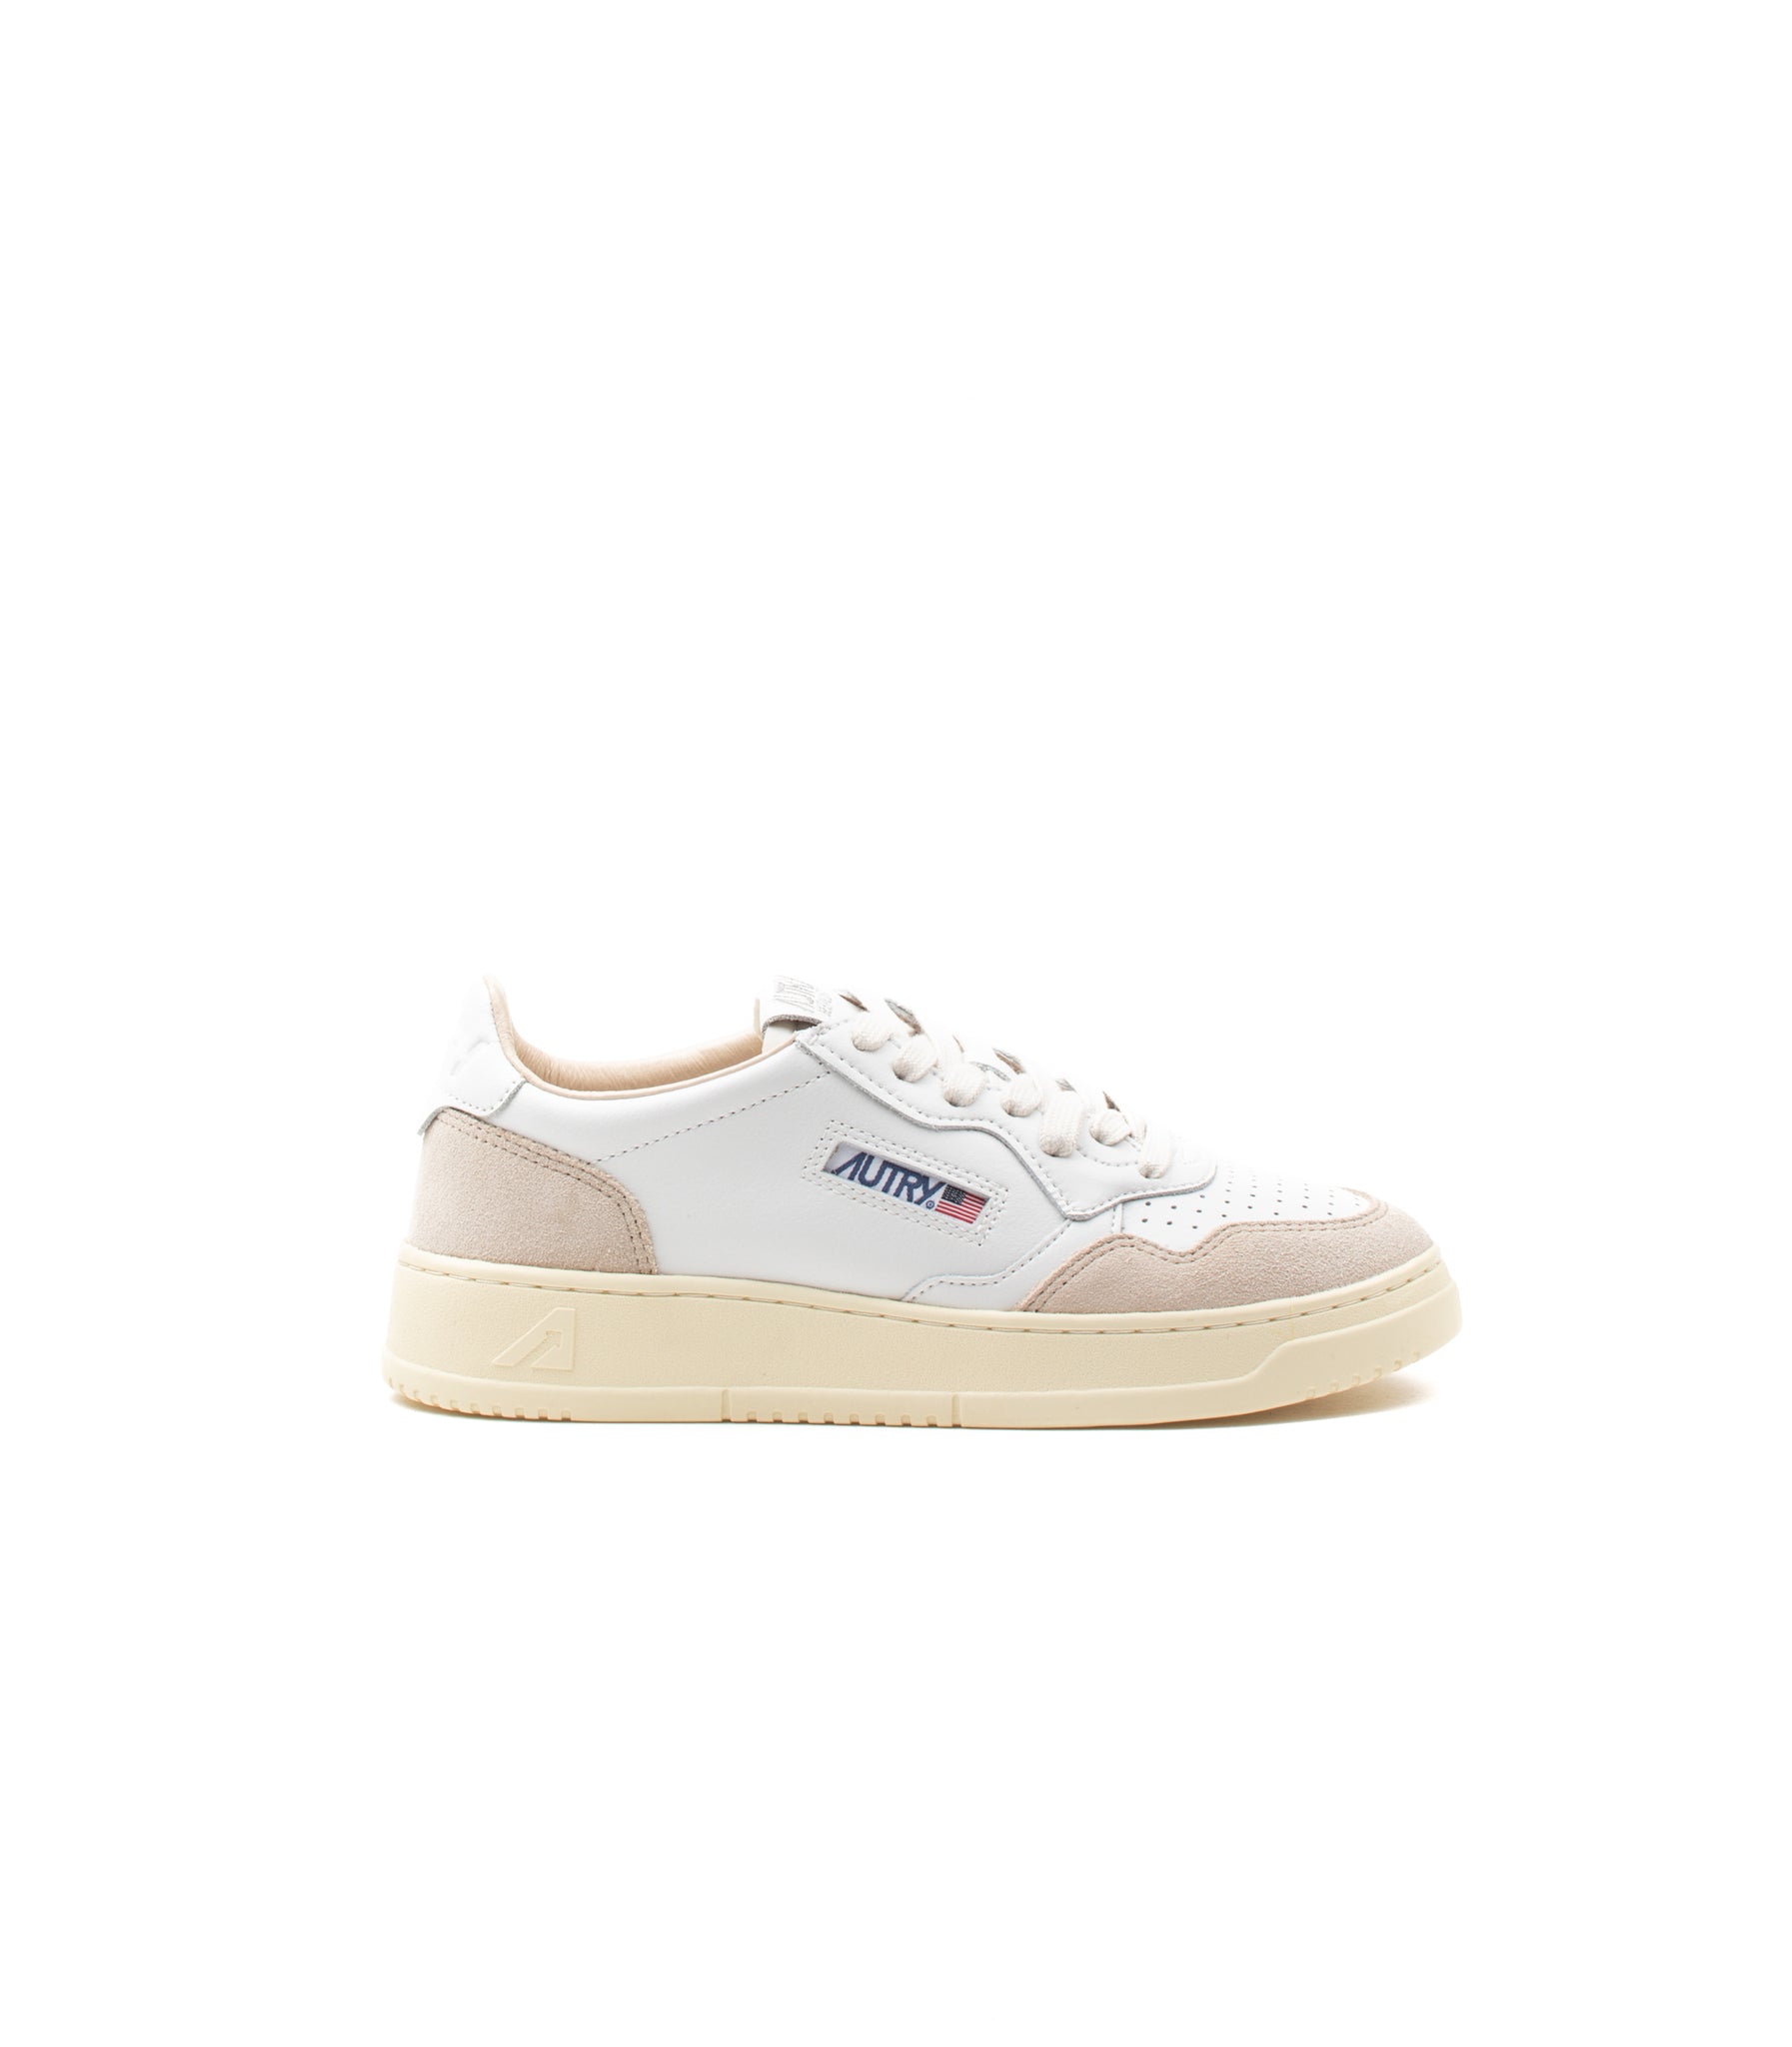 Autry Medalist Low Bianco Suede Donna